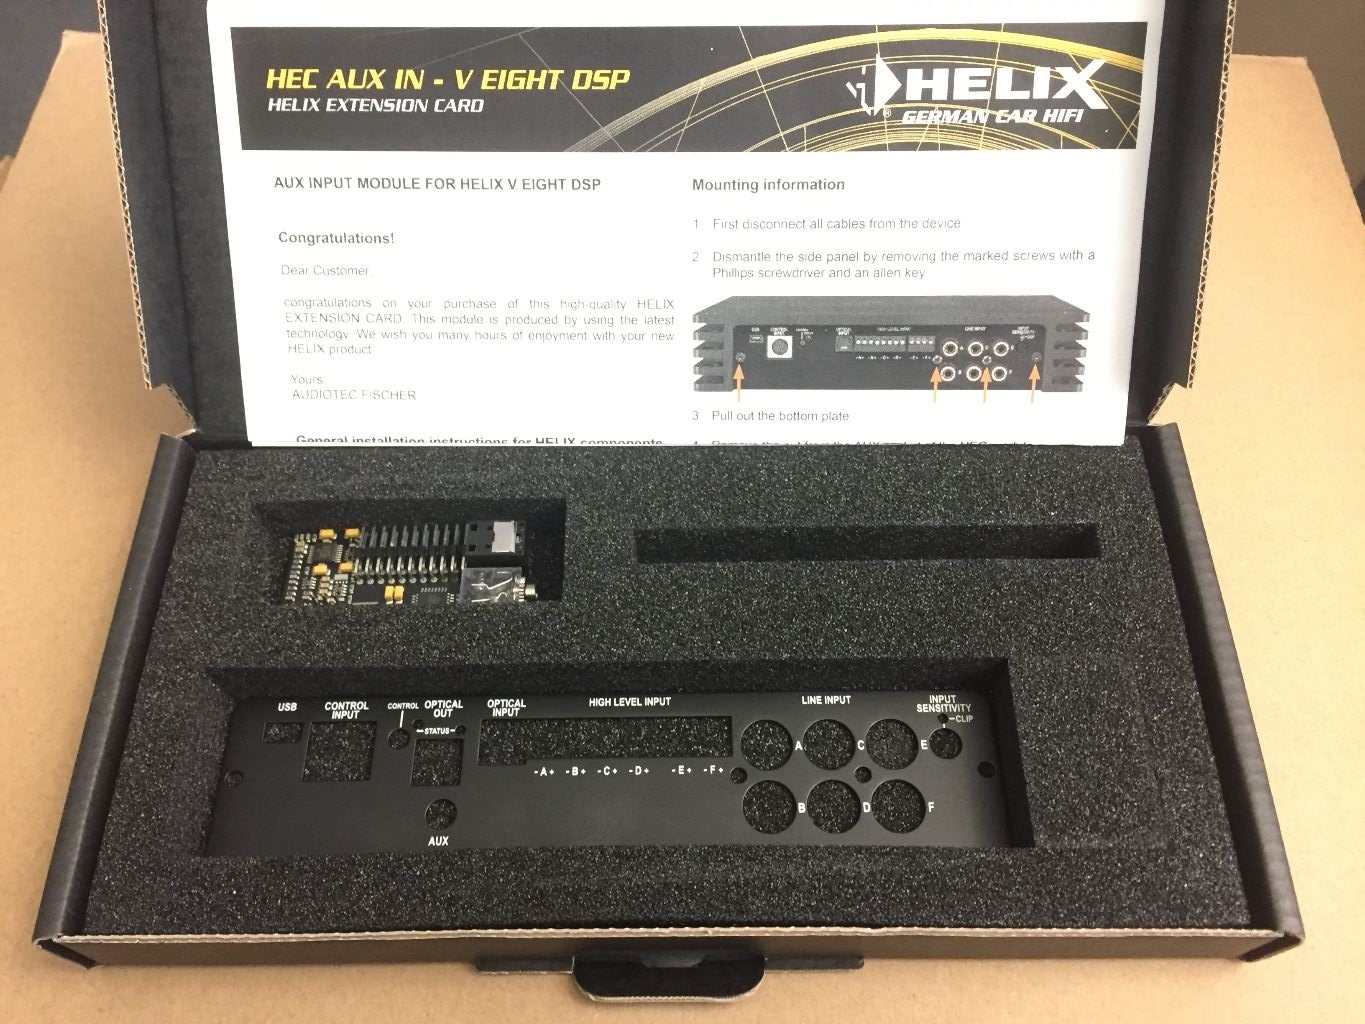 Helix HEC AUX IN - Extension Card